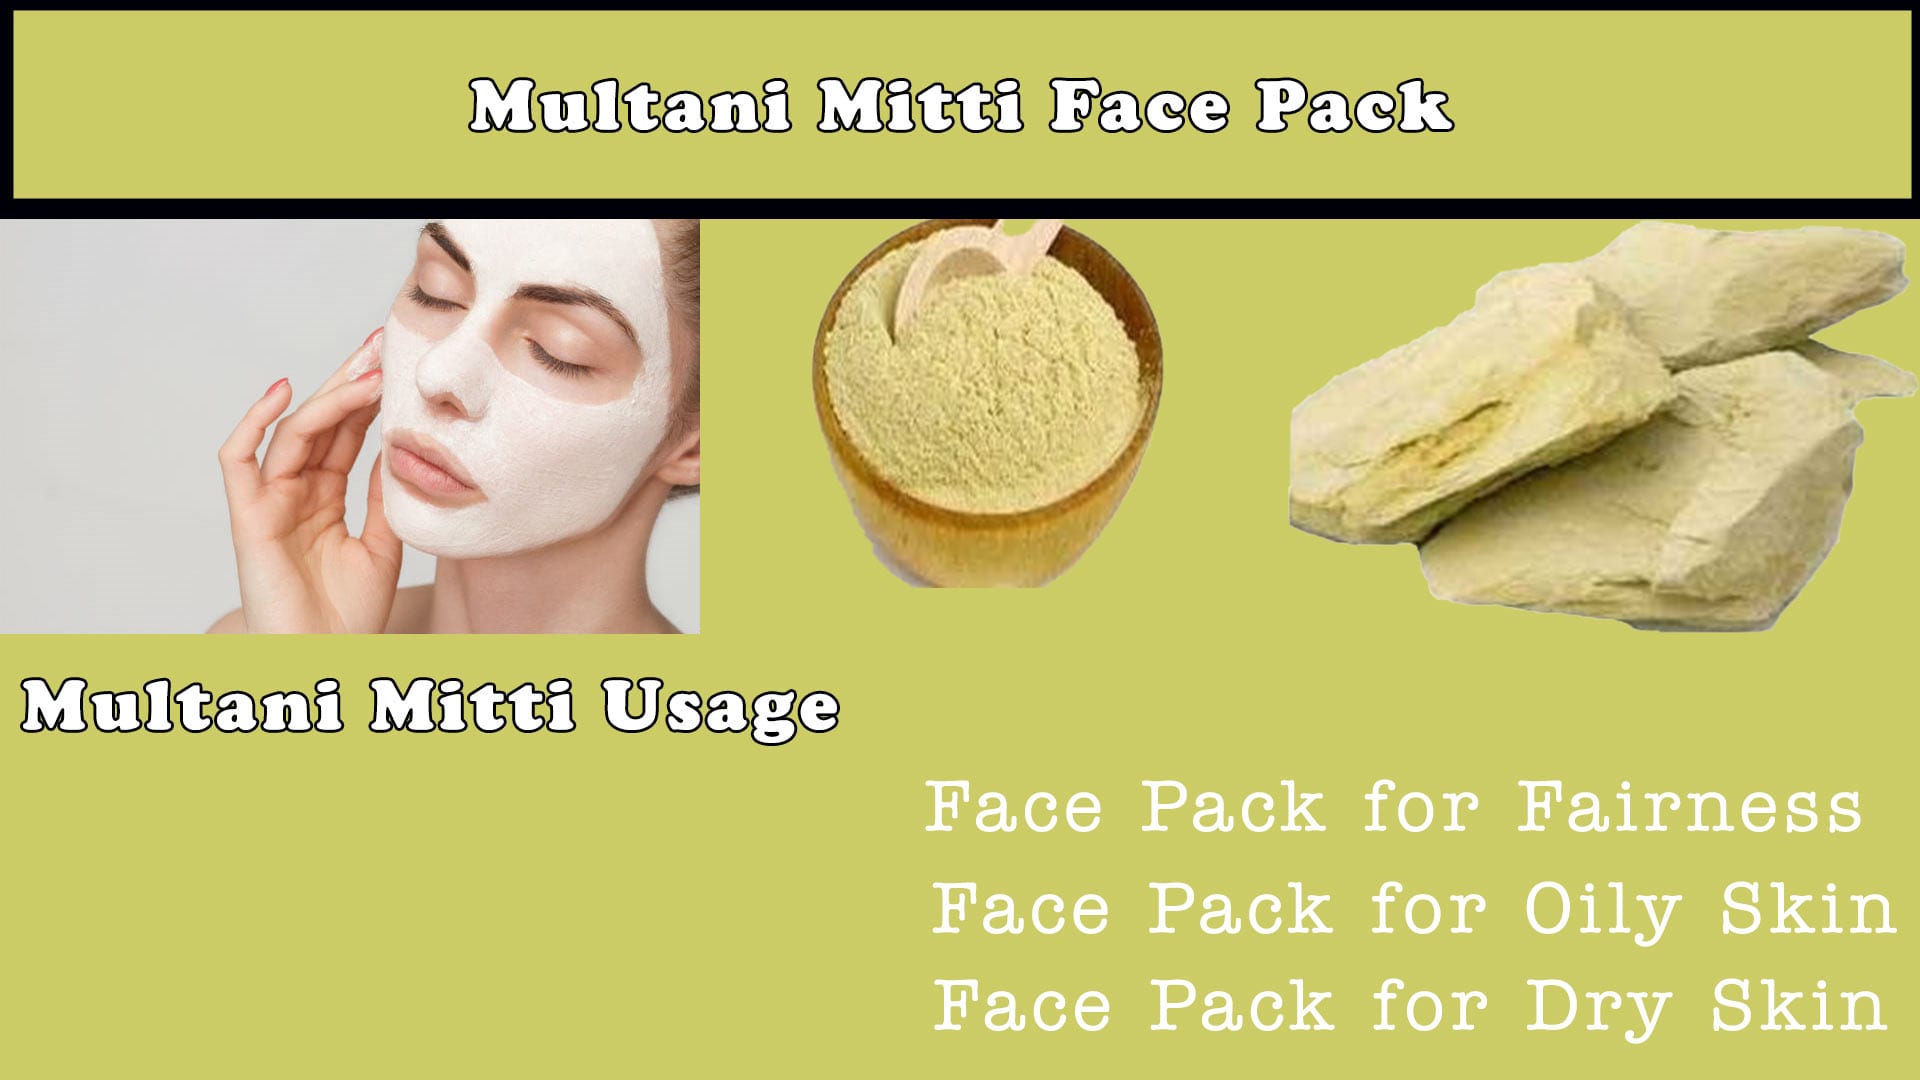 Use Simple Face Packs with Fuller's Earth (Multani Mitti)